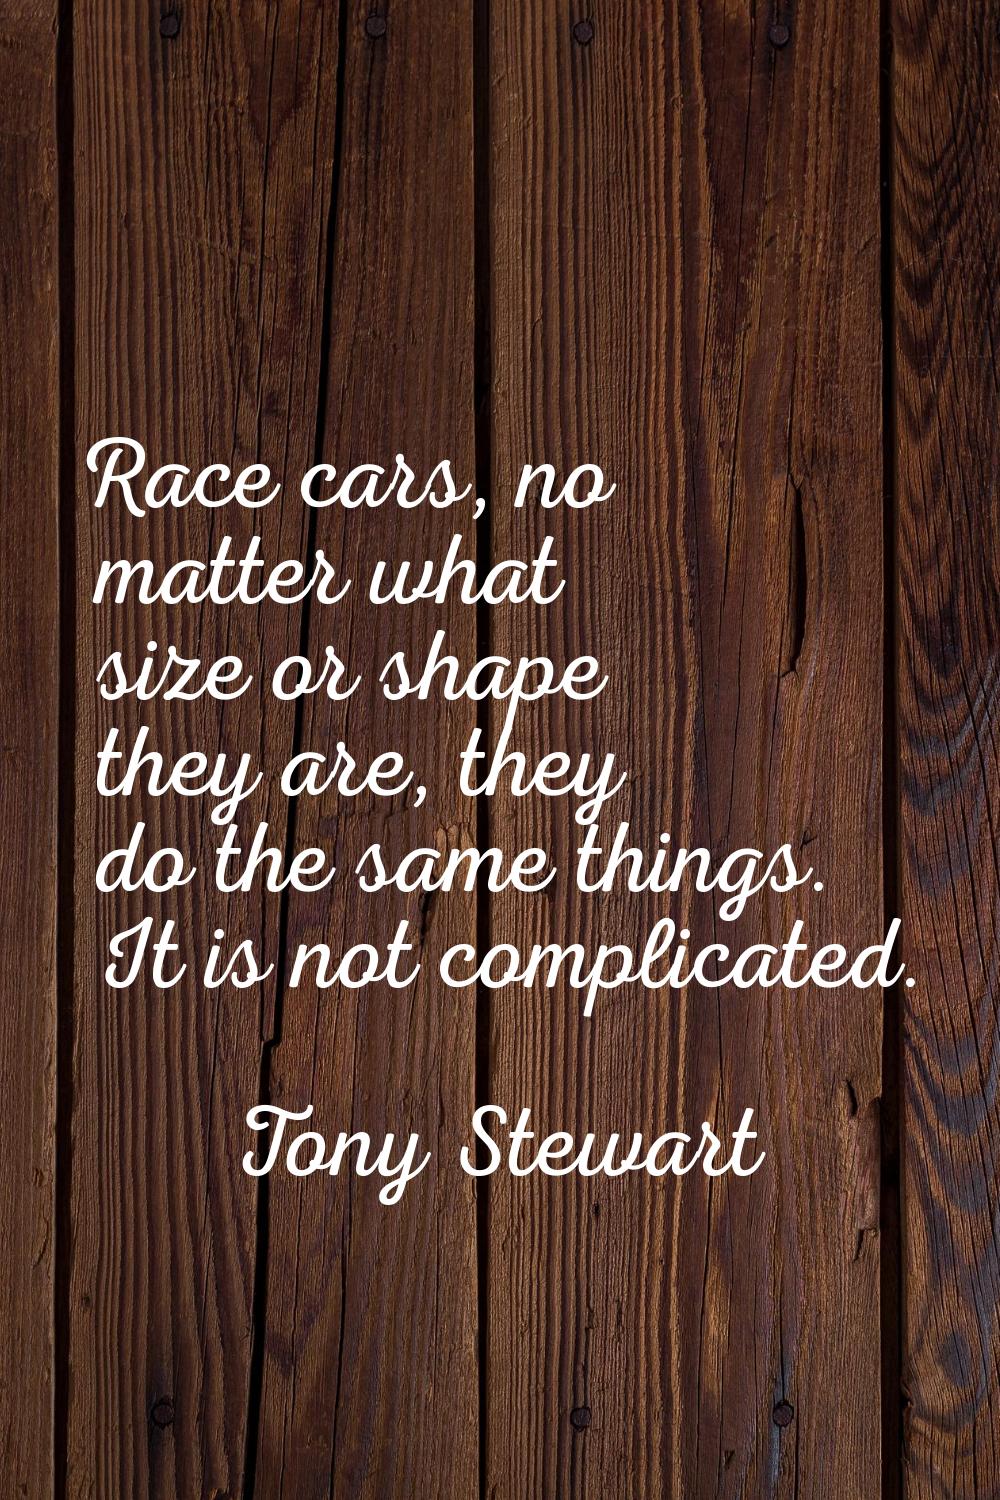 Race cars, no matter what size or shape they are, they do the same things. It is not complicated.